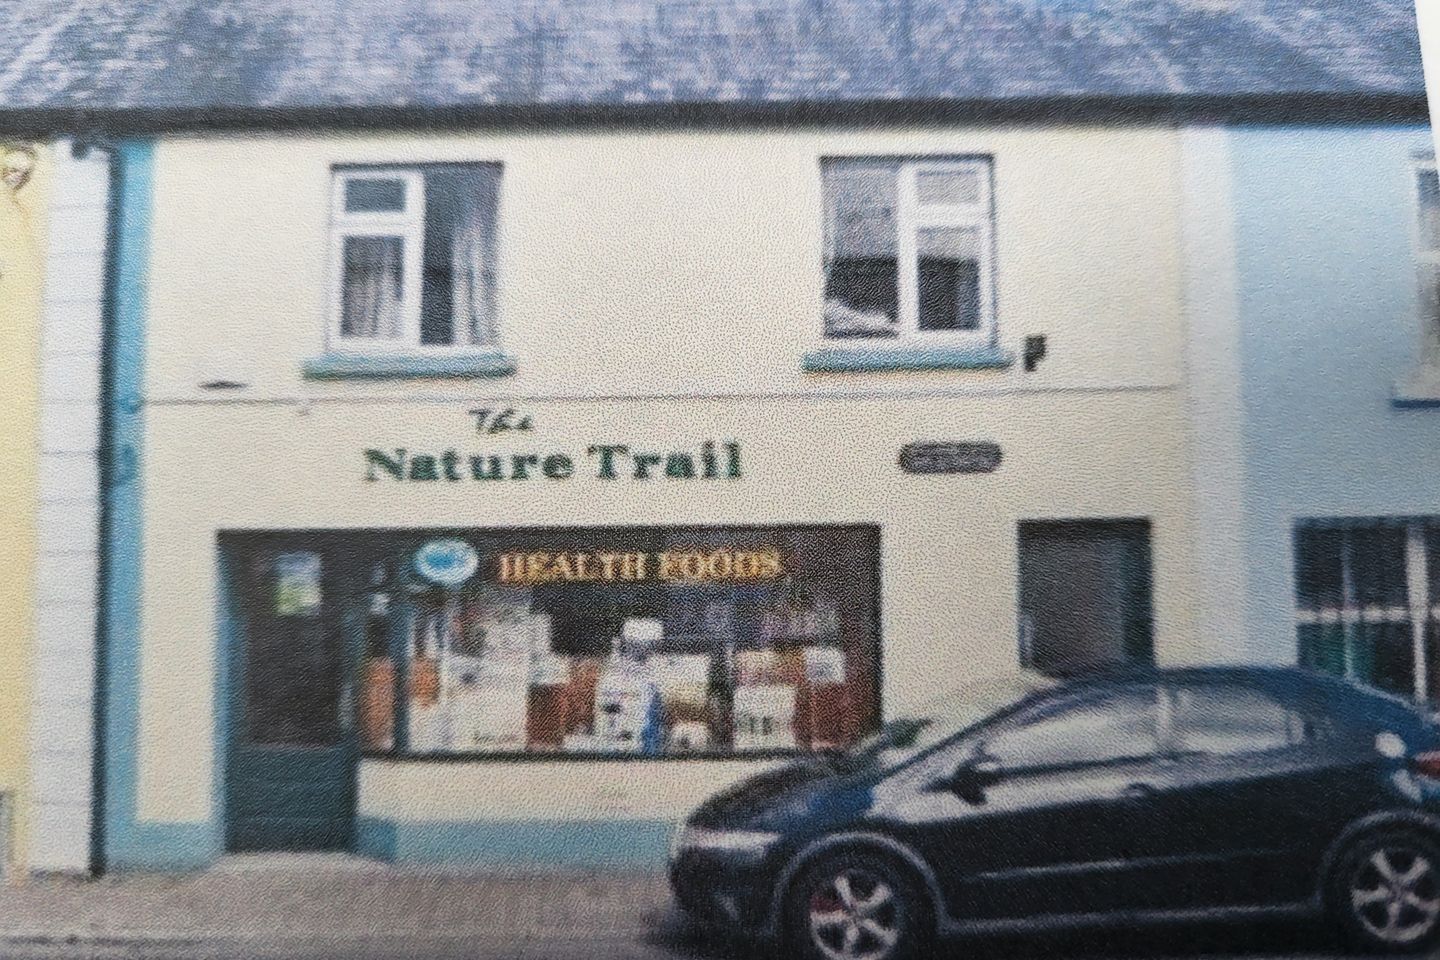 THE NATURE TRAIL, Hyde Street, Mohill, Co. Leitrim